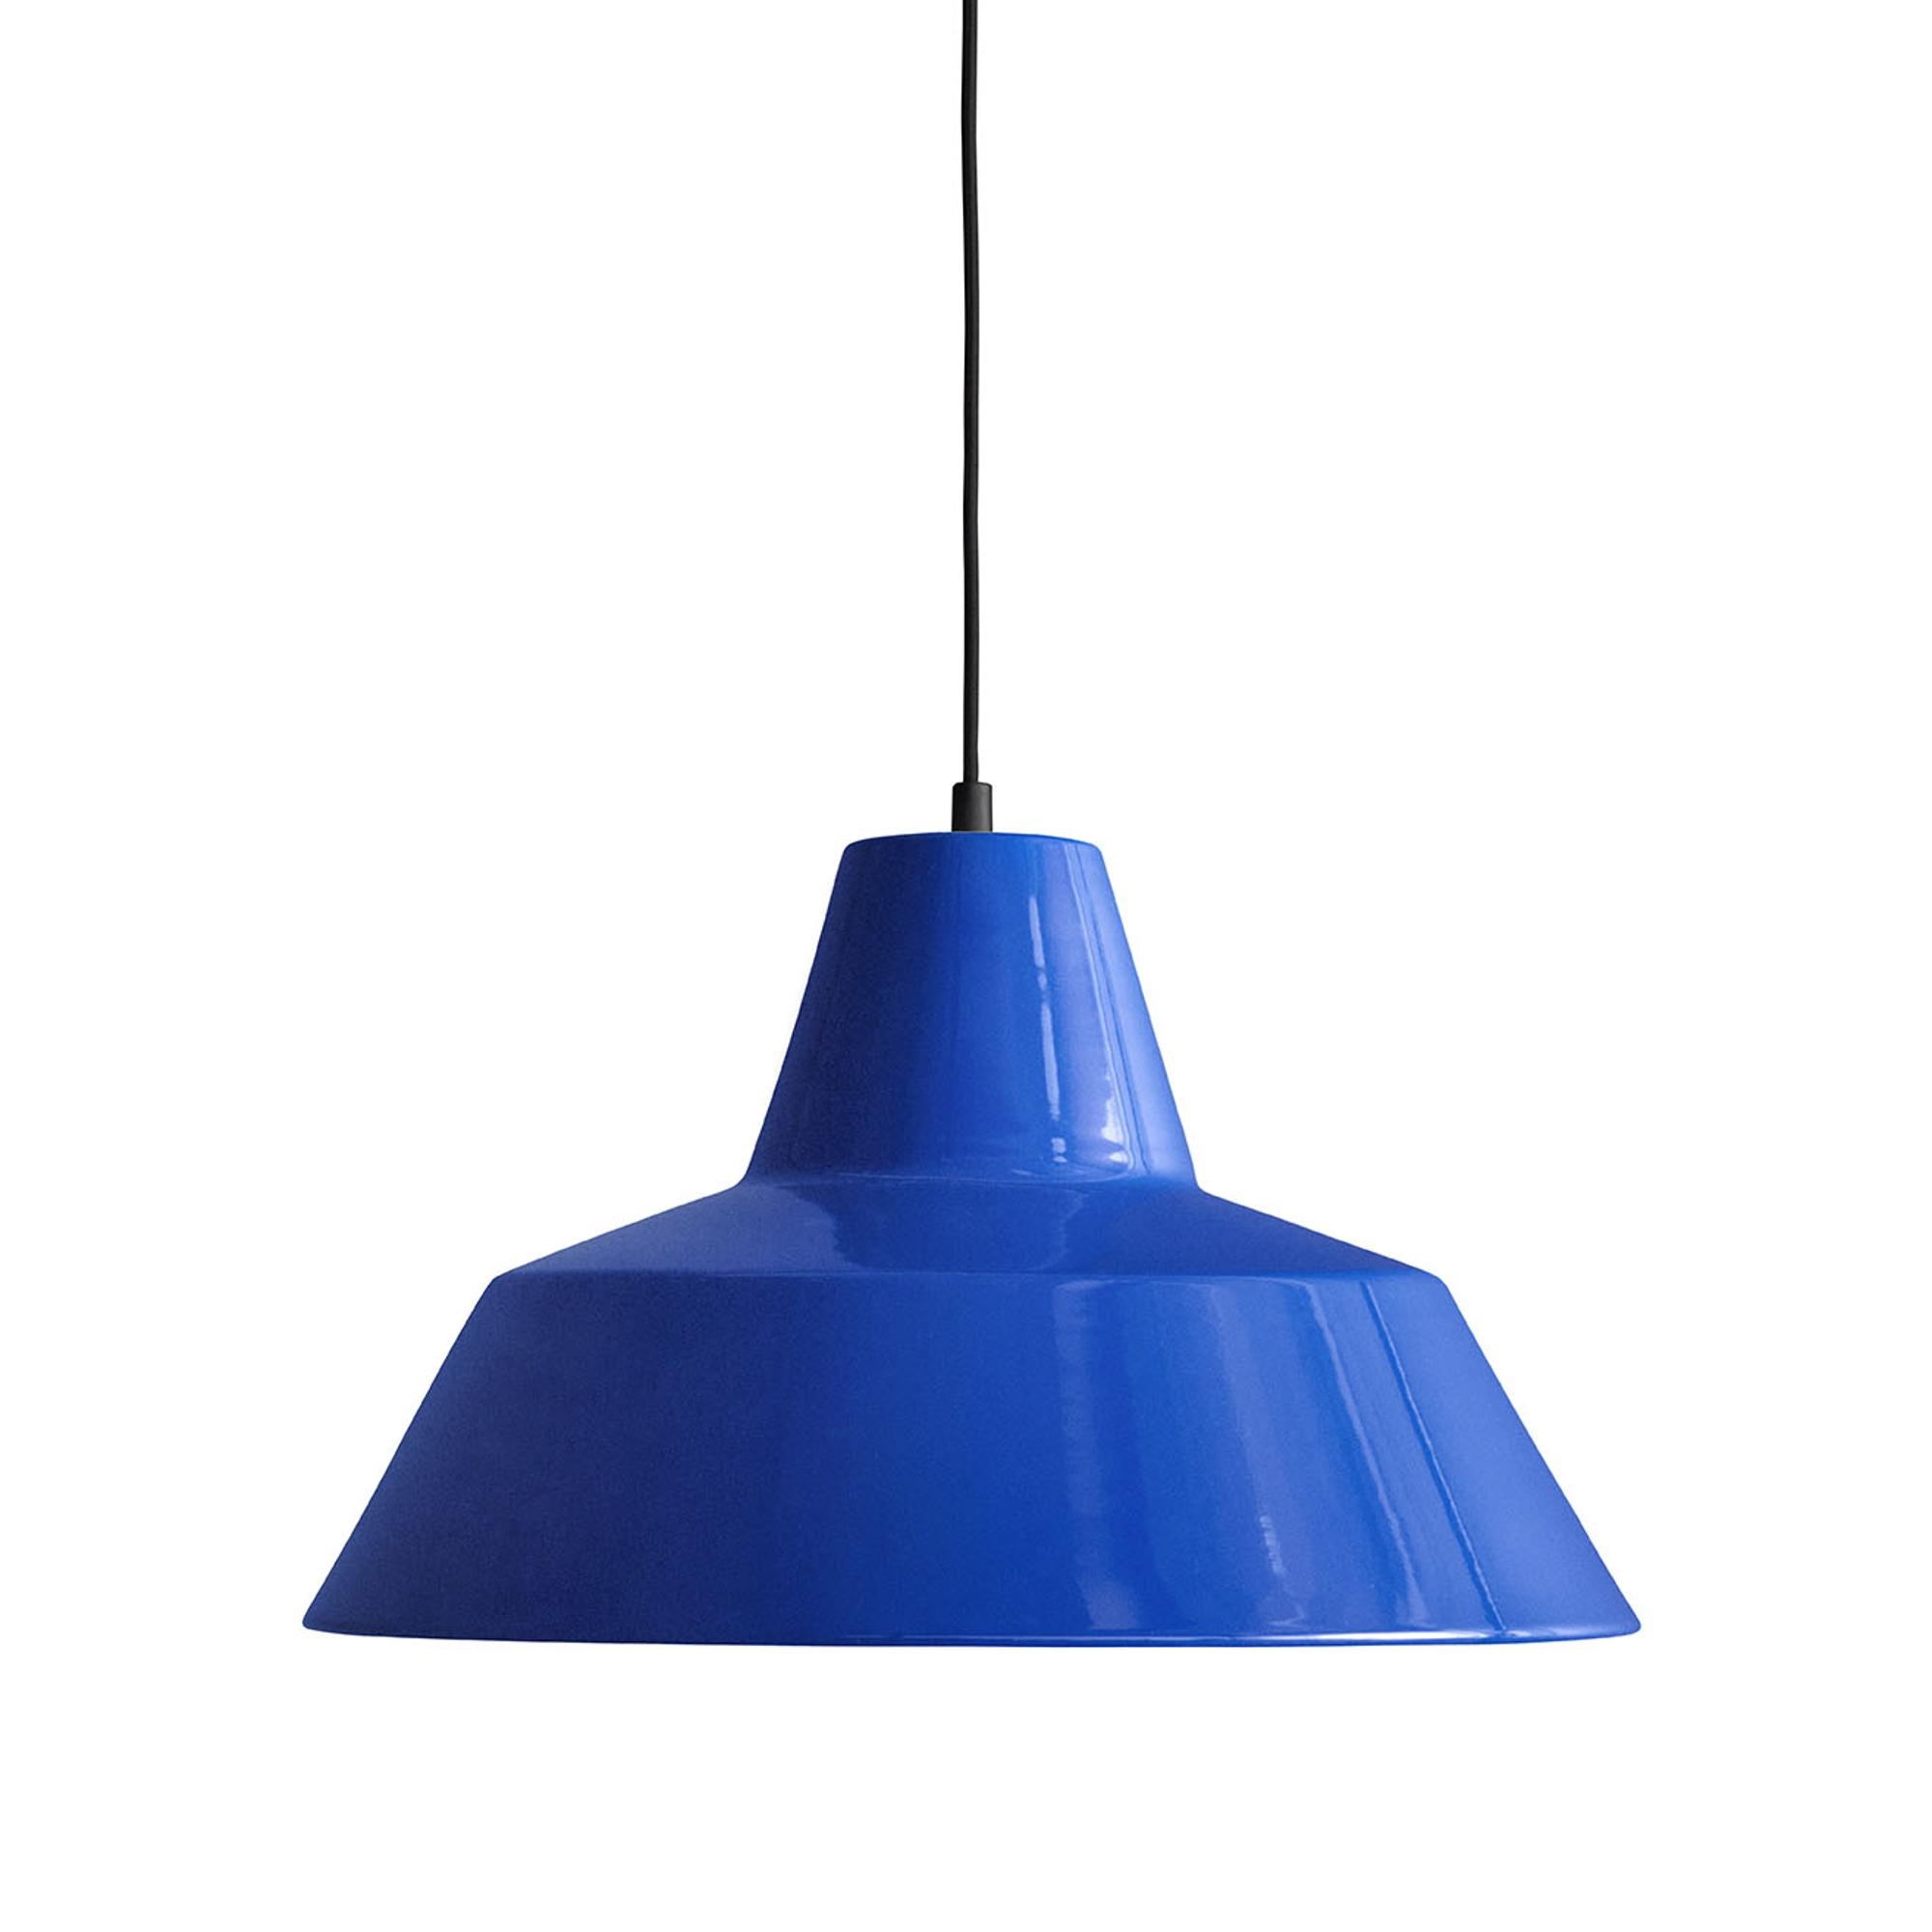 Made By Hand Workshop Lamp Pendant Blue W4